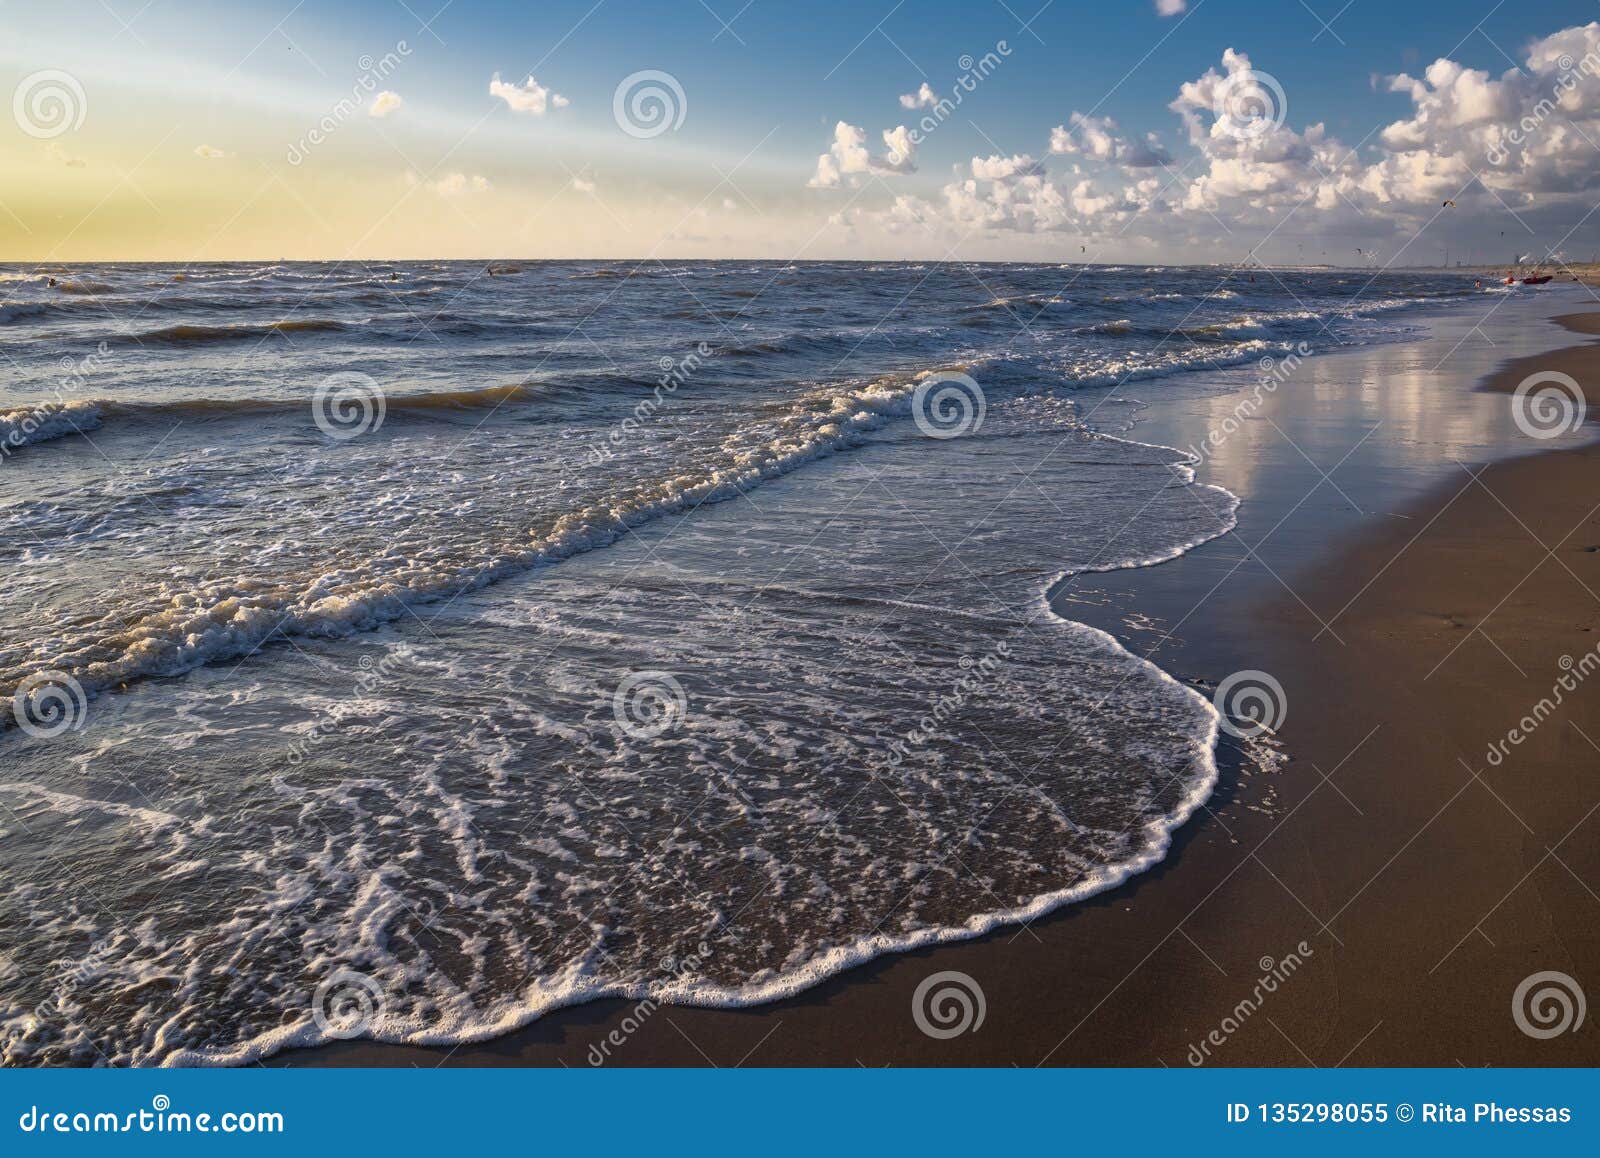 view from the beach on the white foam cups of the rising waves at high tide in the north sea, all this at sunset